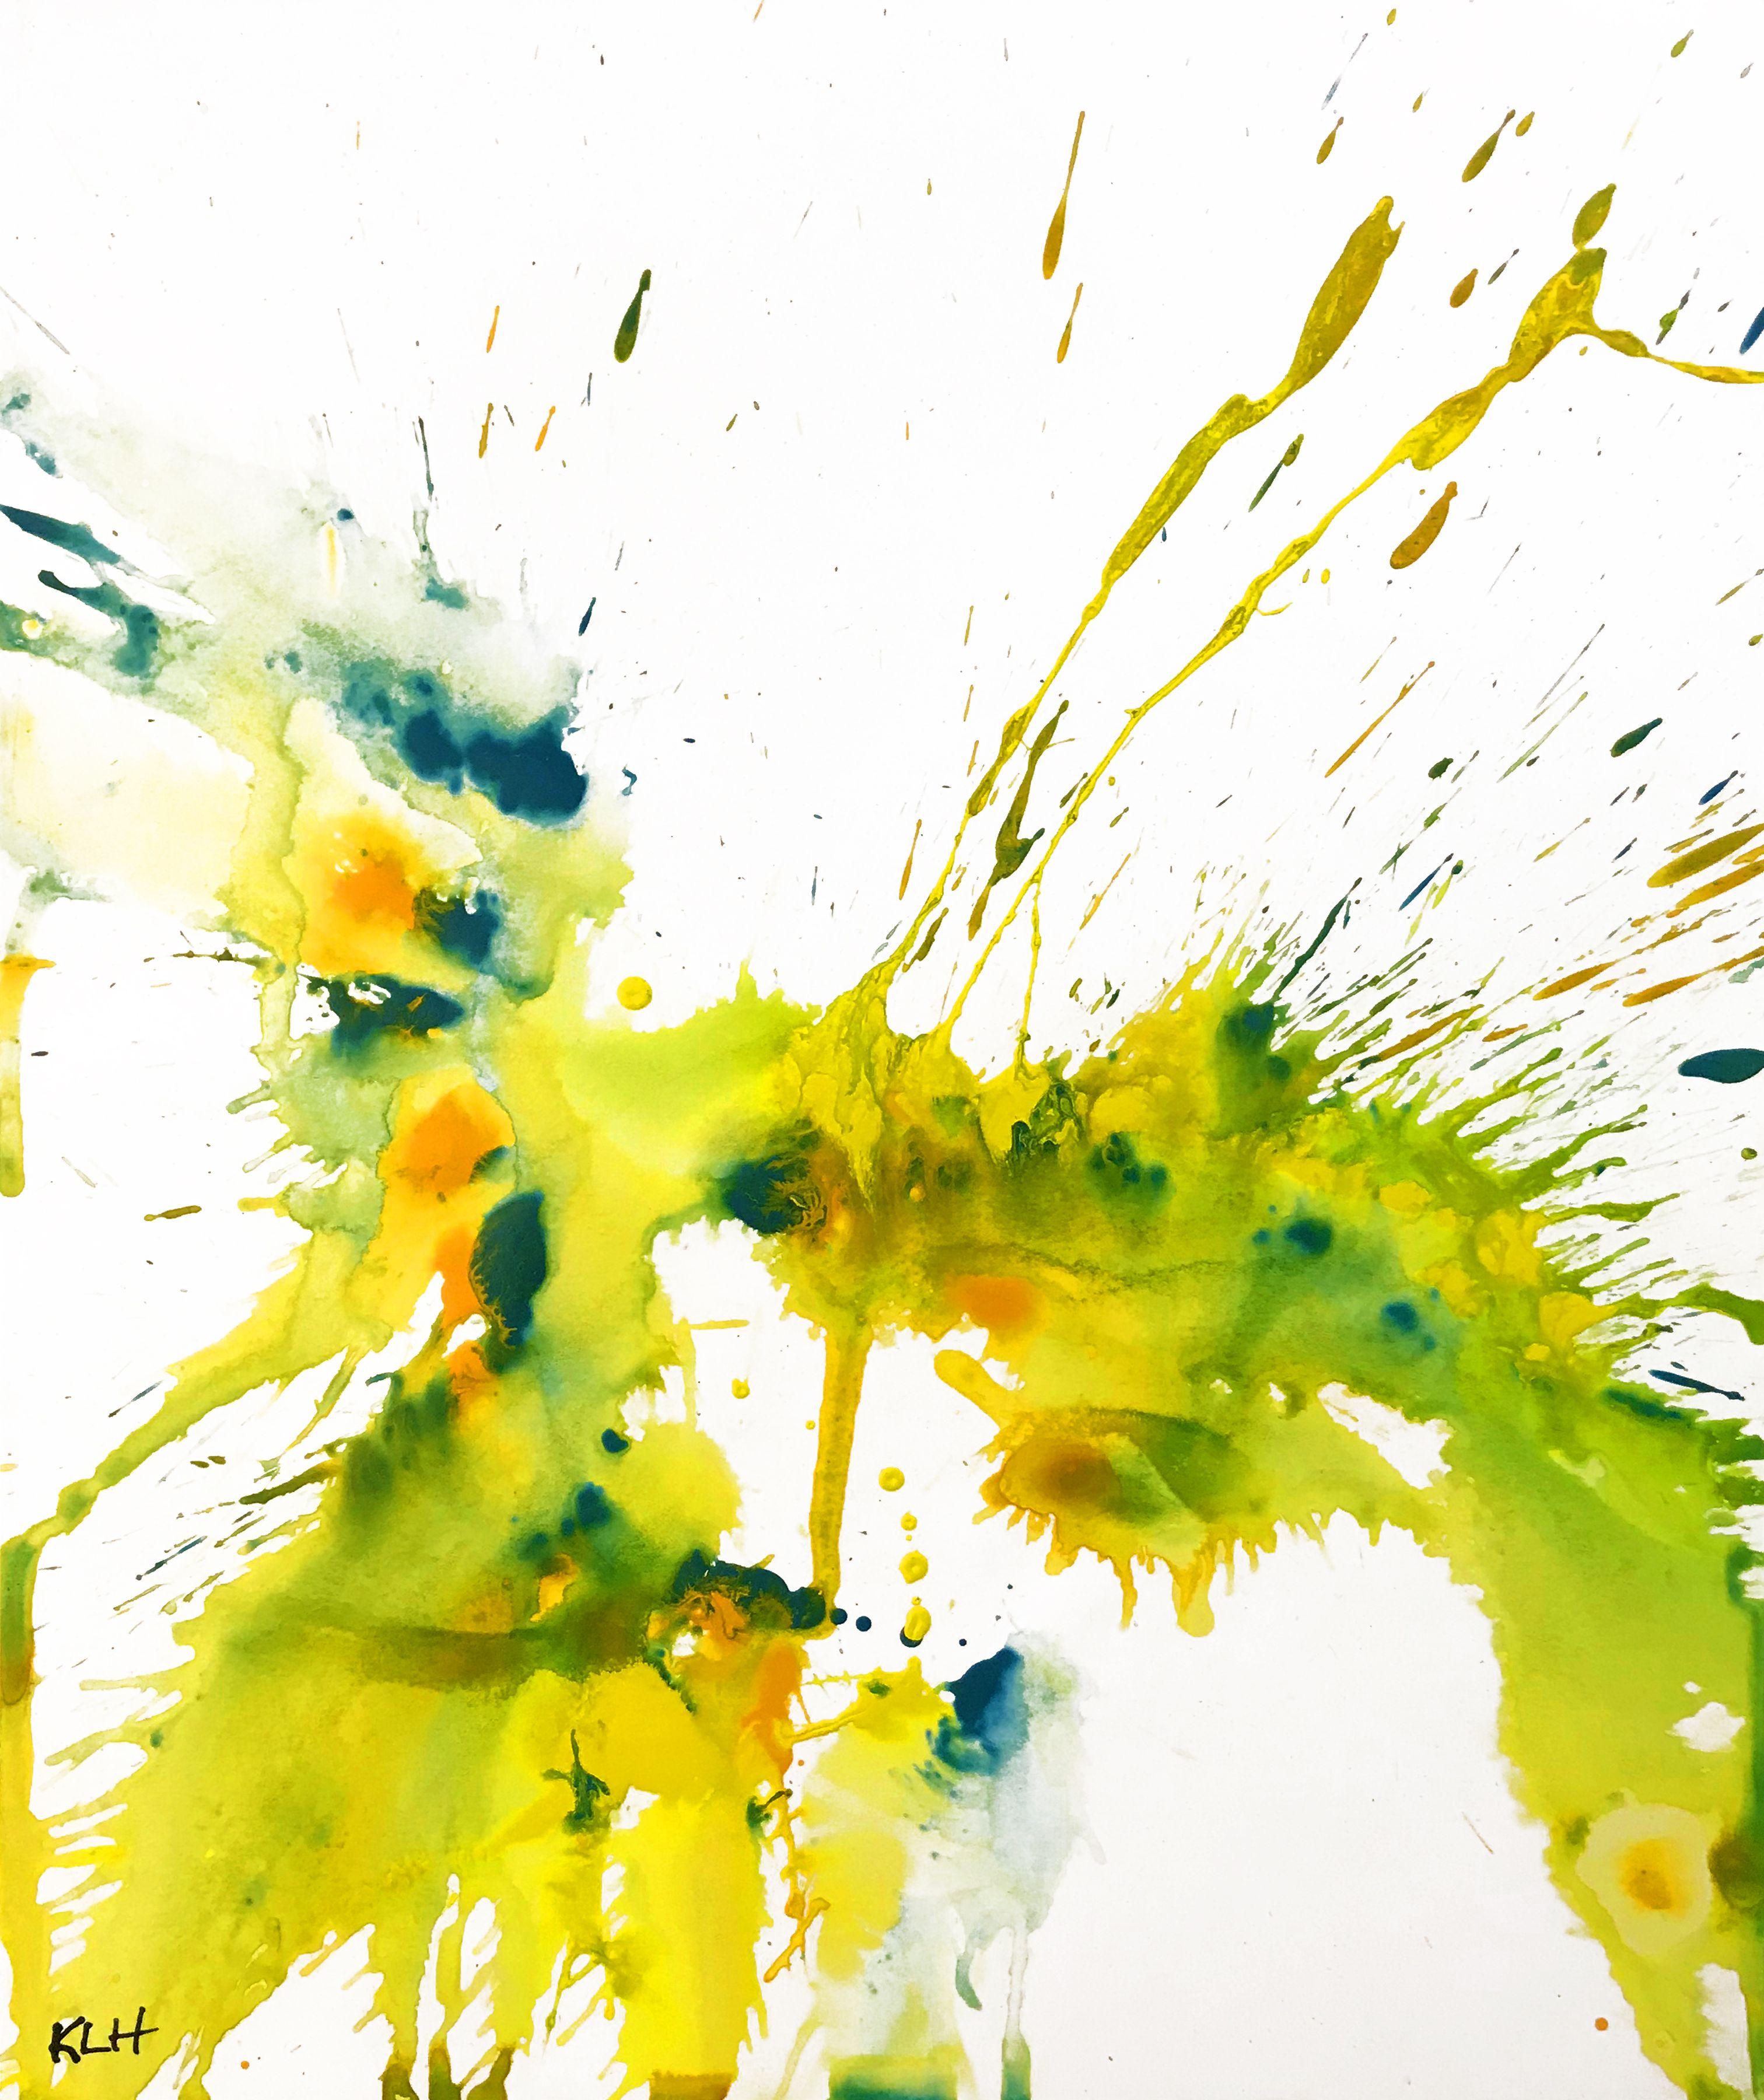 2 - Chaotic Crazy Lemon Lime Paintings 4172.4173, Painting, Watercolor on Paper - Art by Kris Haas